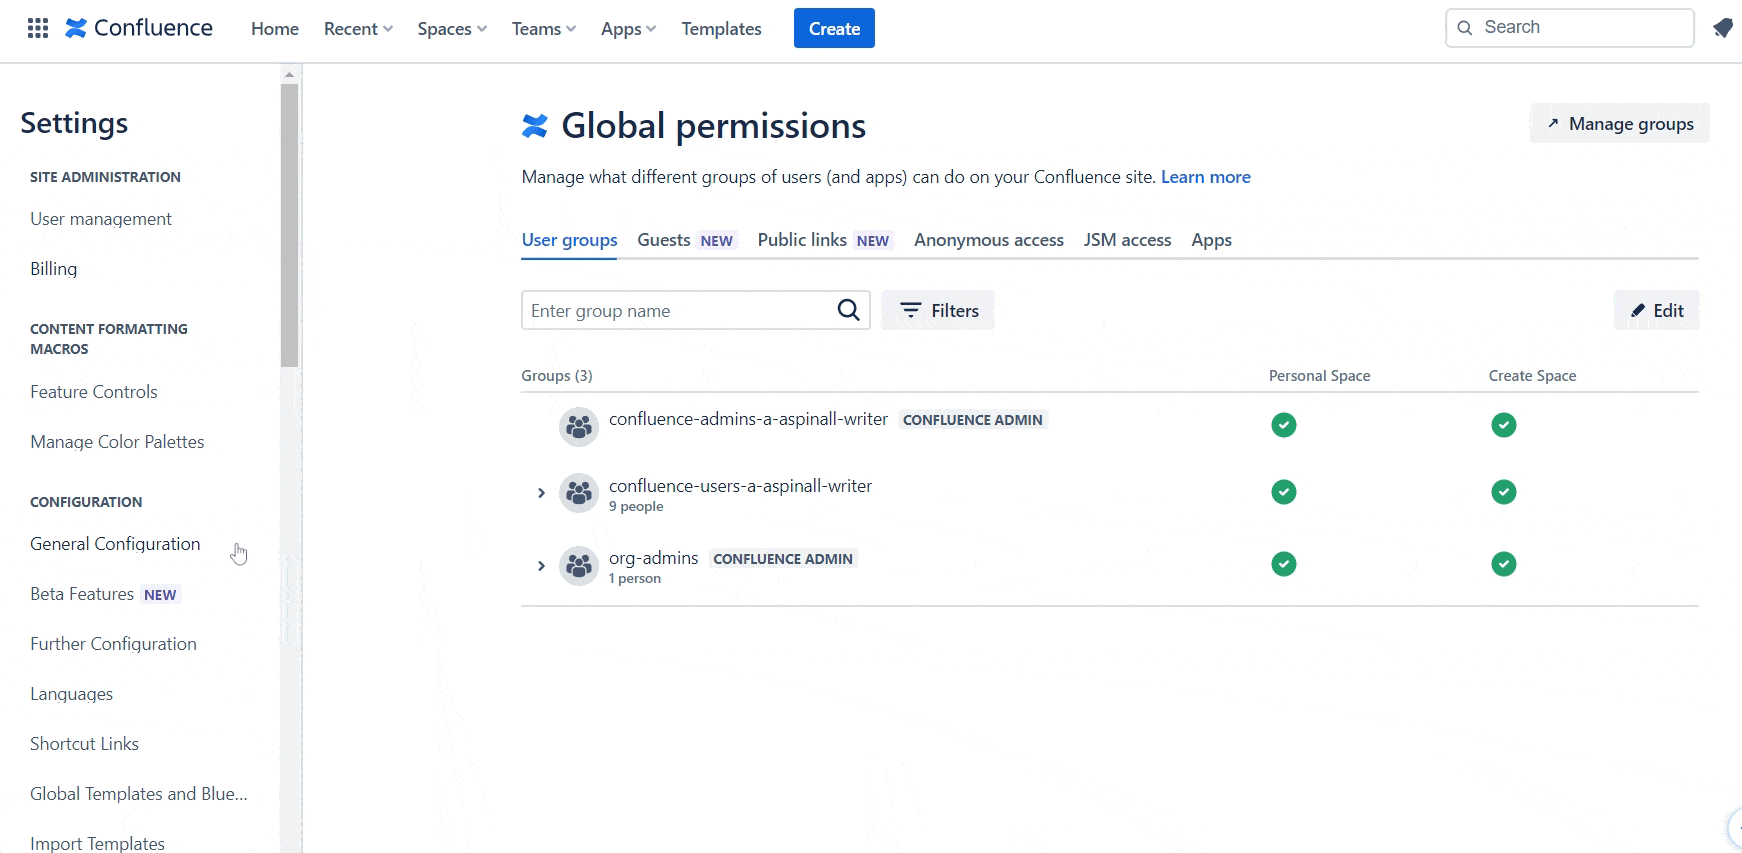 A GIF showing a user changing access permissions in Confluence’s global permissions options